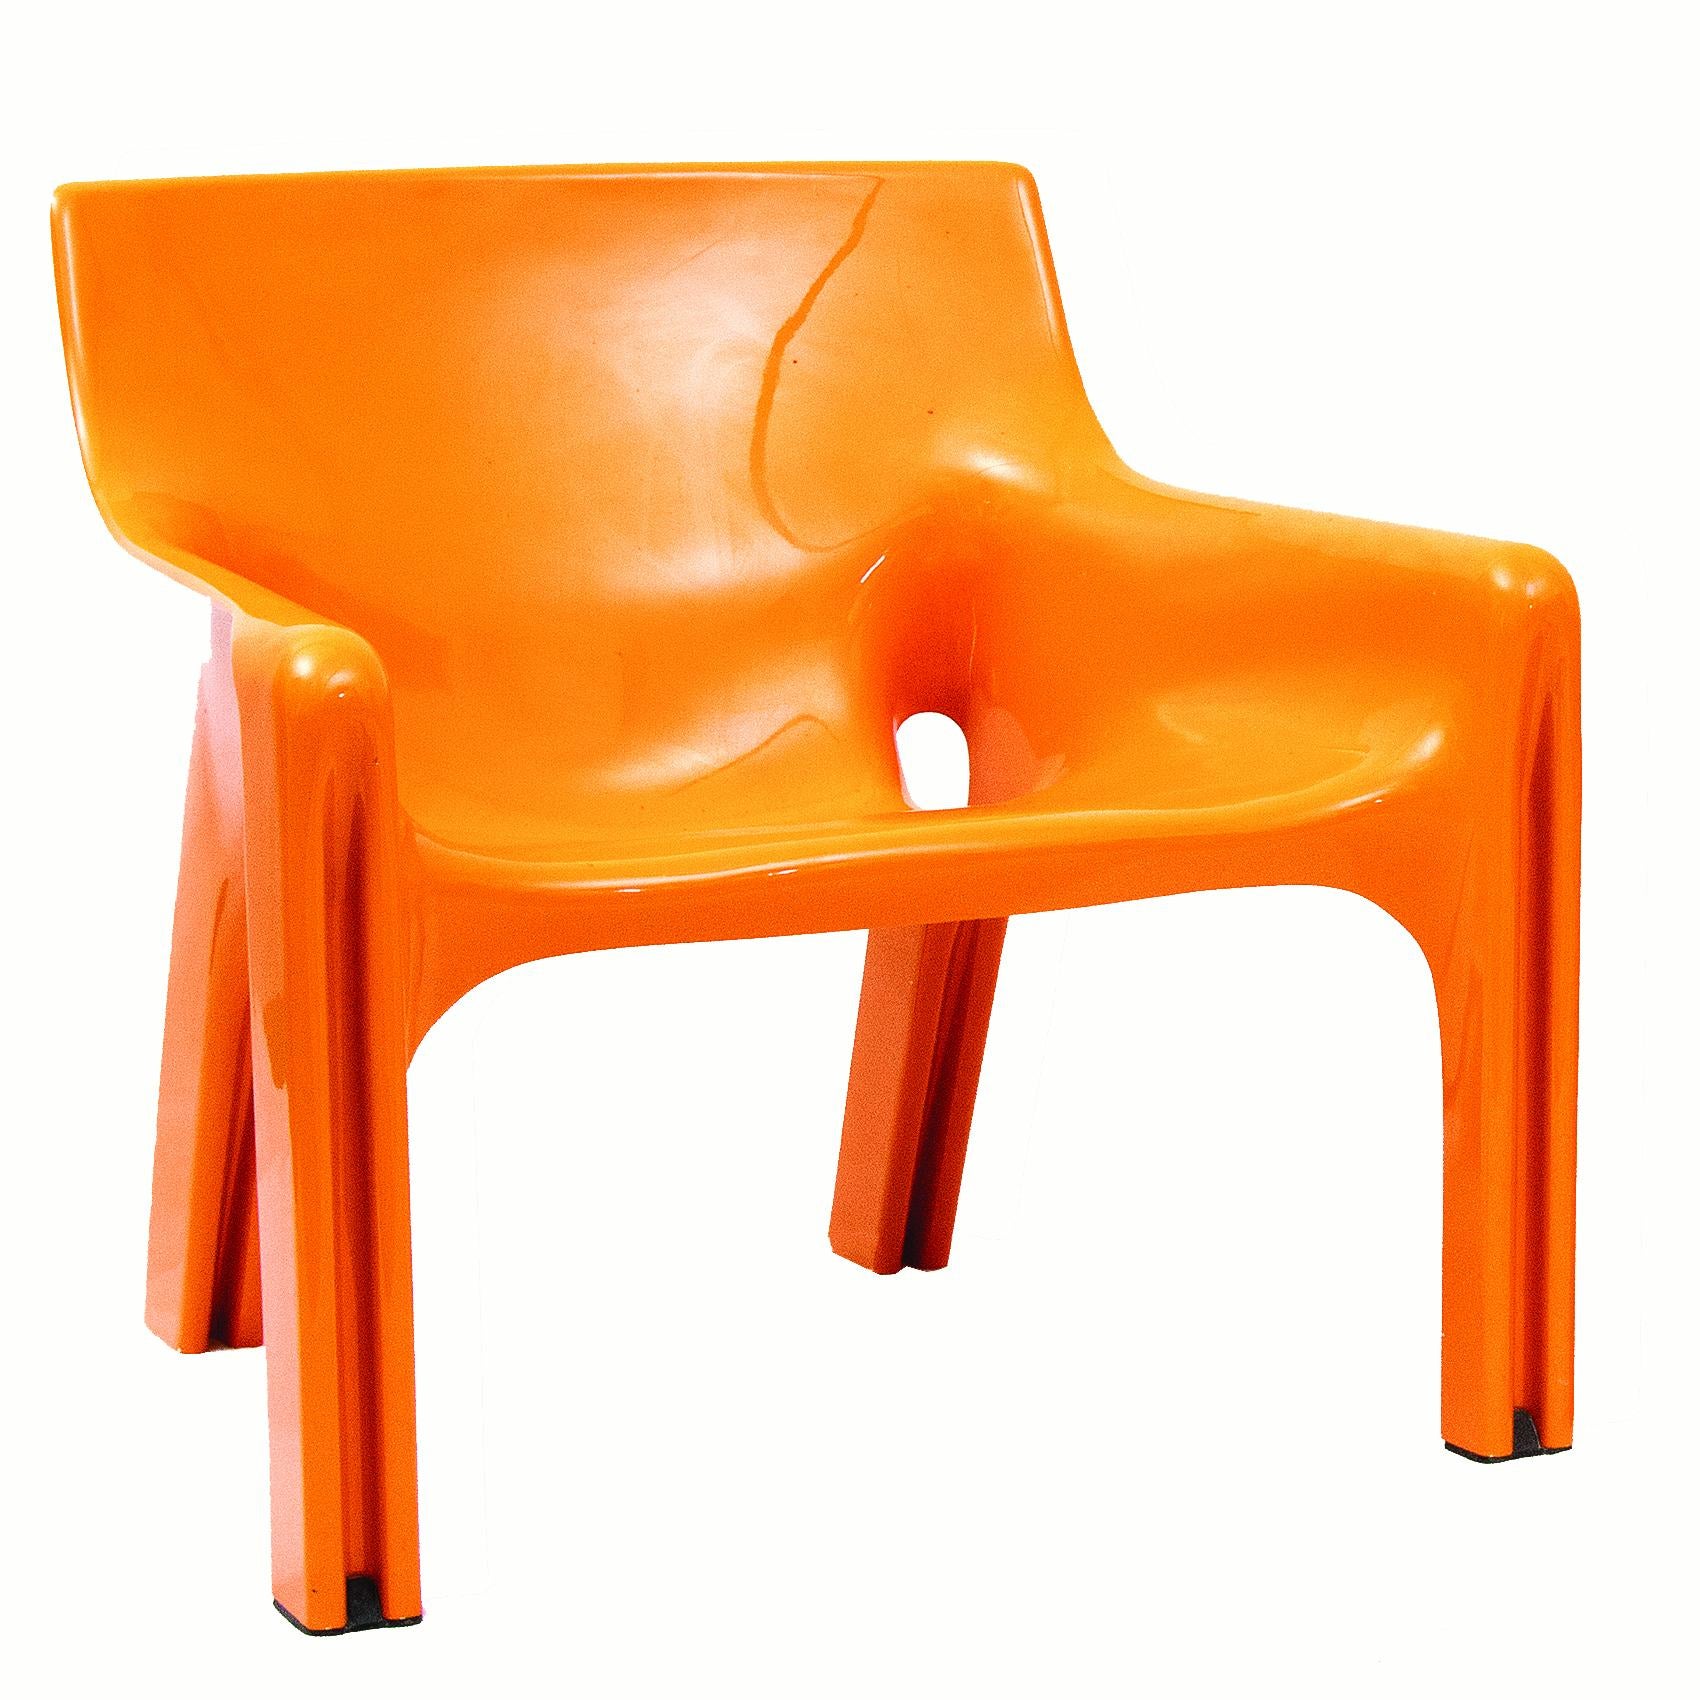 A pair of orange ABS armchairs. Each with a bent back on four feet.
Manufactured by Artemide.
Marked underneath: “ SPA Artemide Milano, Vicario, Vico Magistretti, Made in Italy “.
Italy,
1971.

Provenance
Private collection

Literature
Italy: The